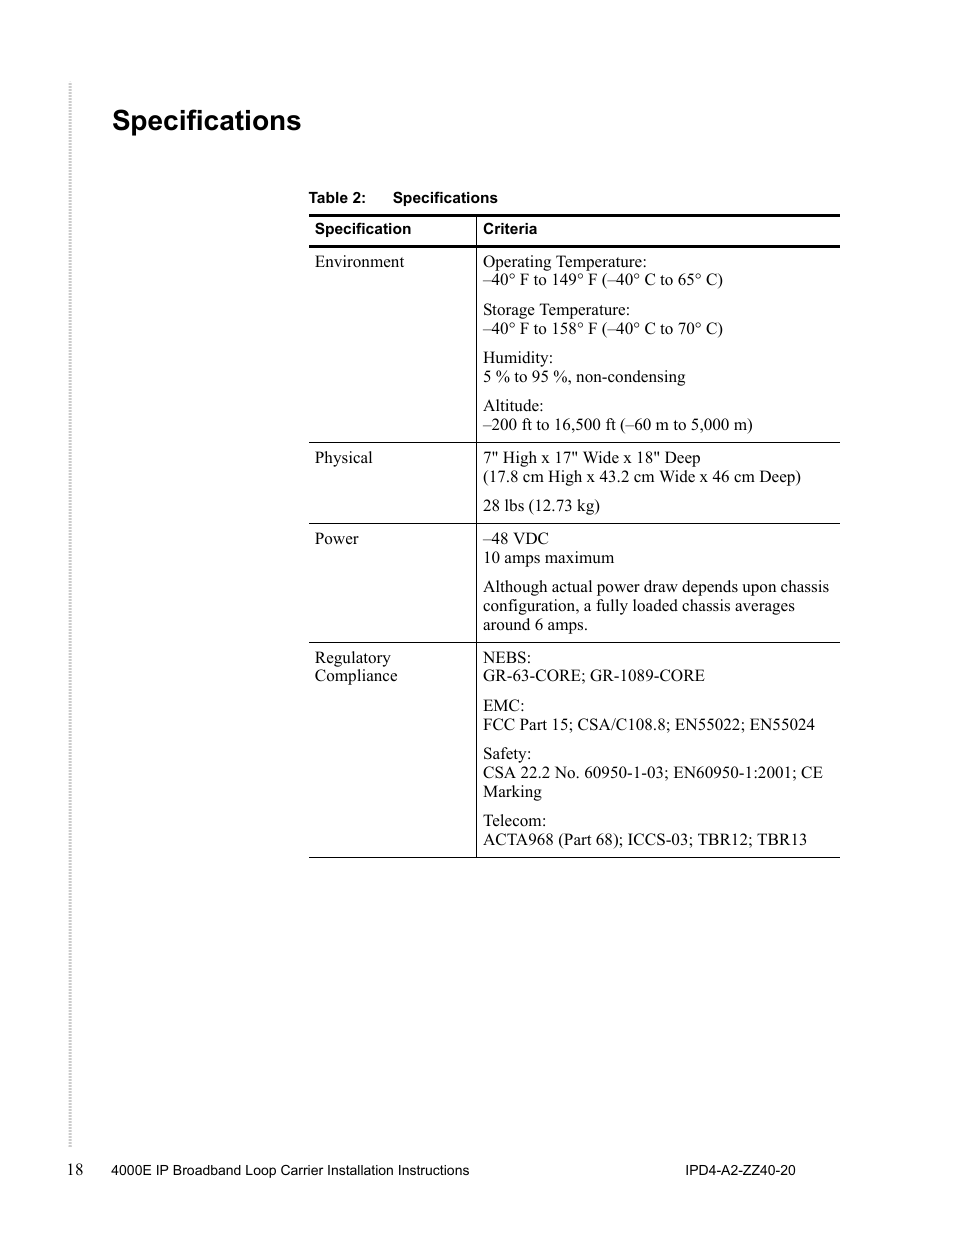 Specifications | Zhone Technologies 4000E User Manual | Page 18 / 22